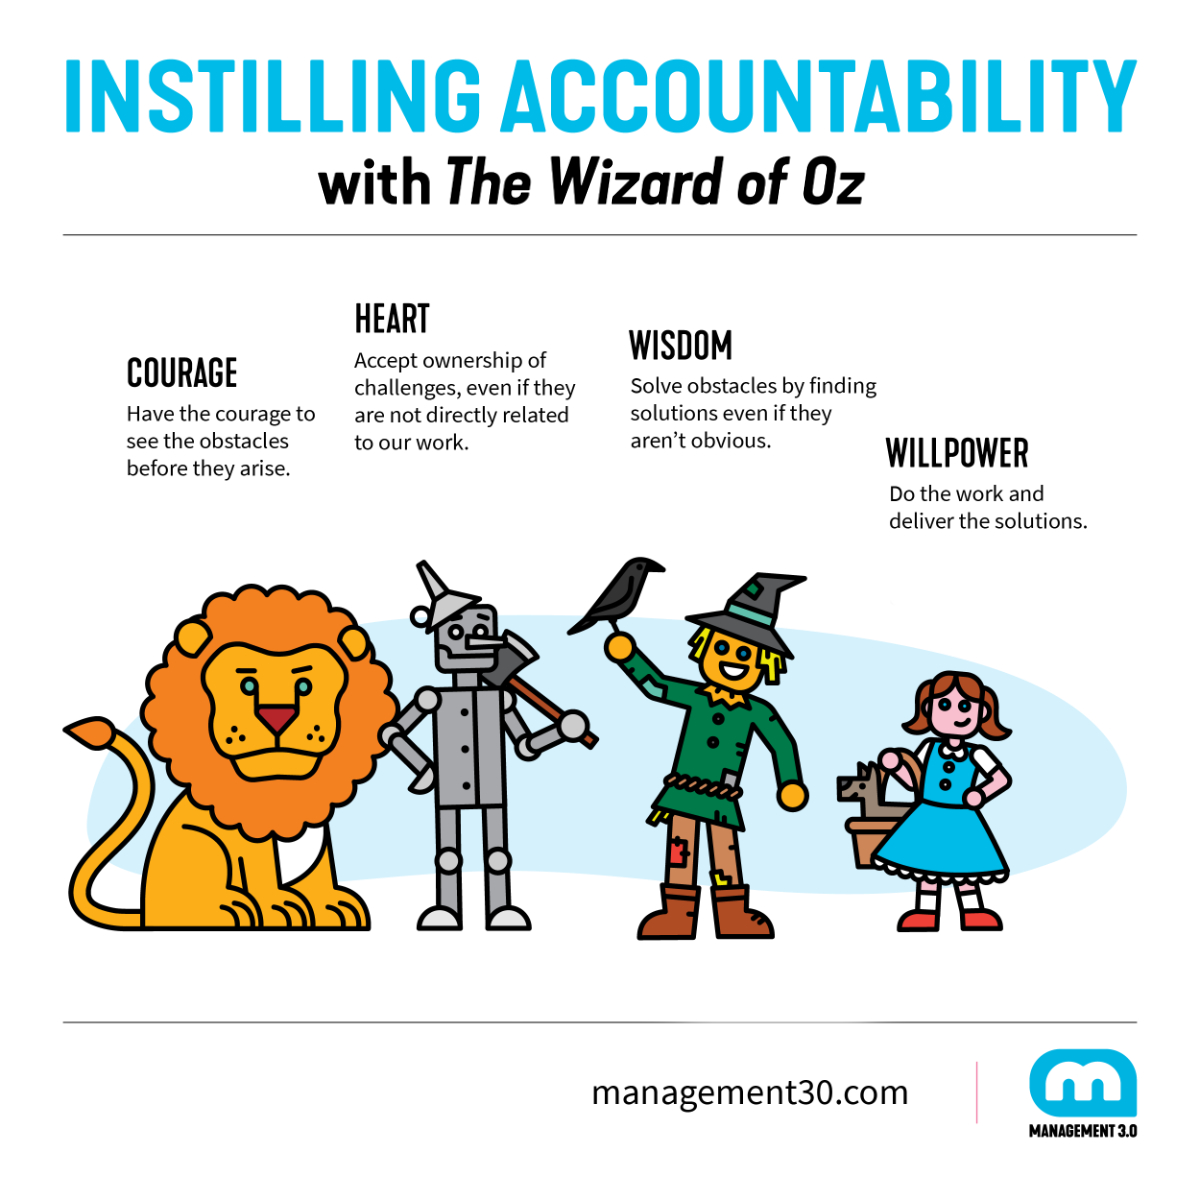 Instilling Accountability with the Wizard of Oz